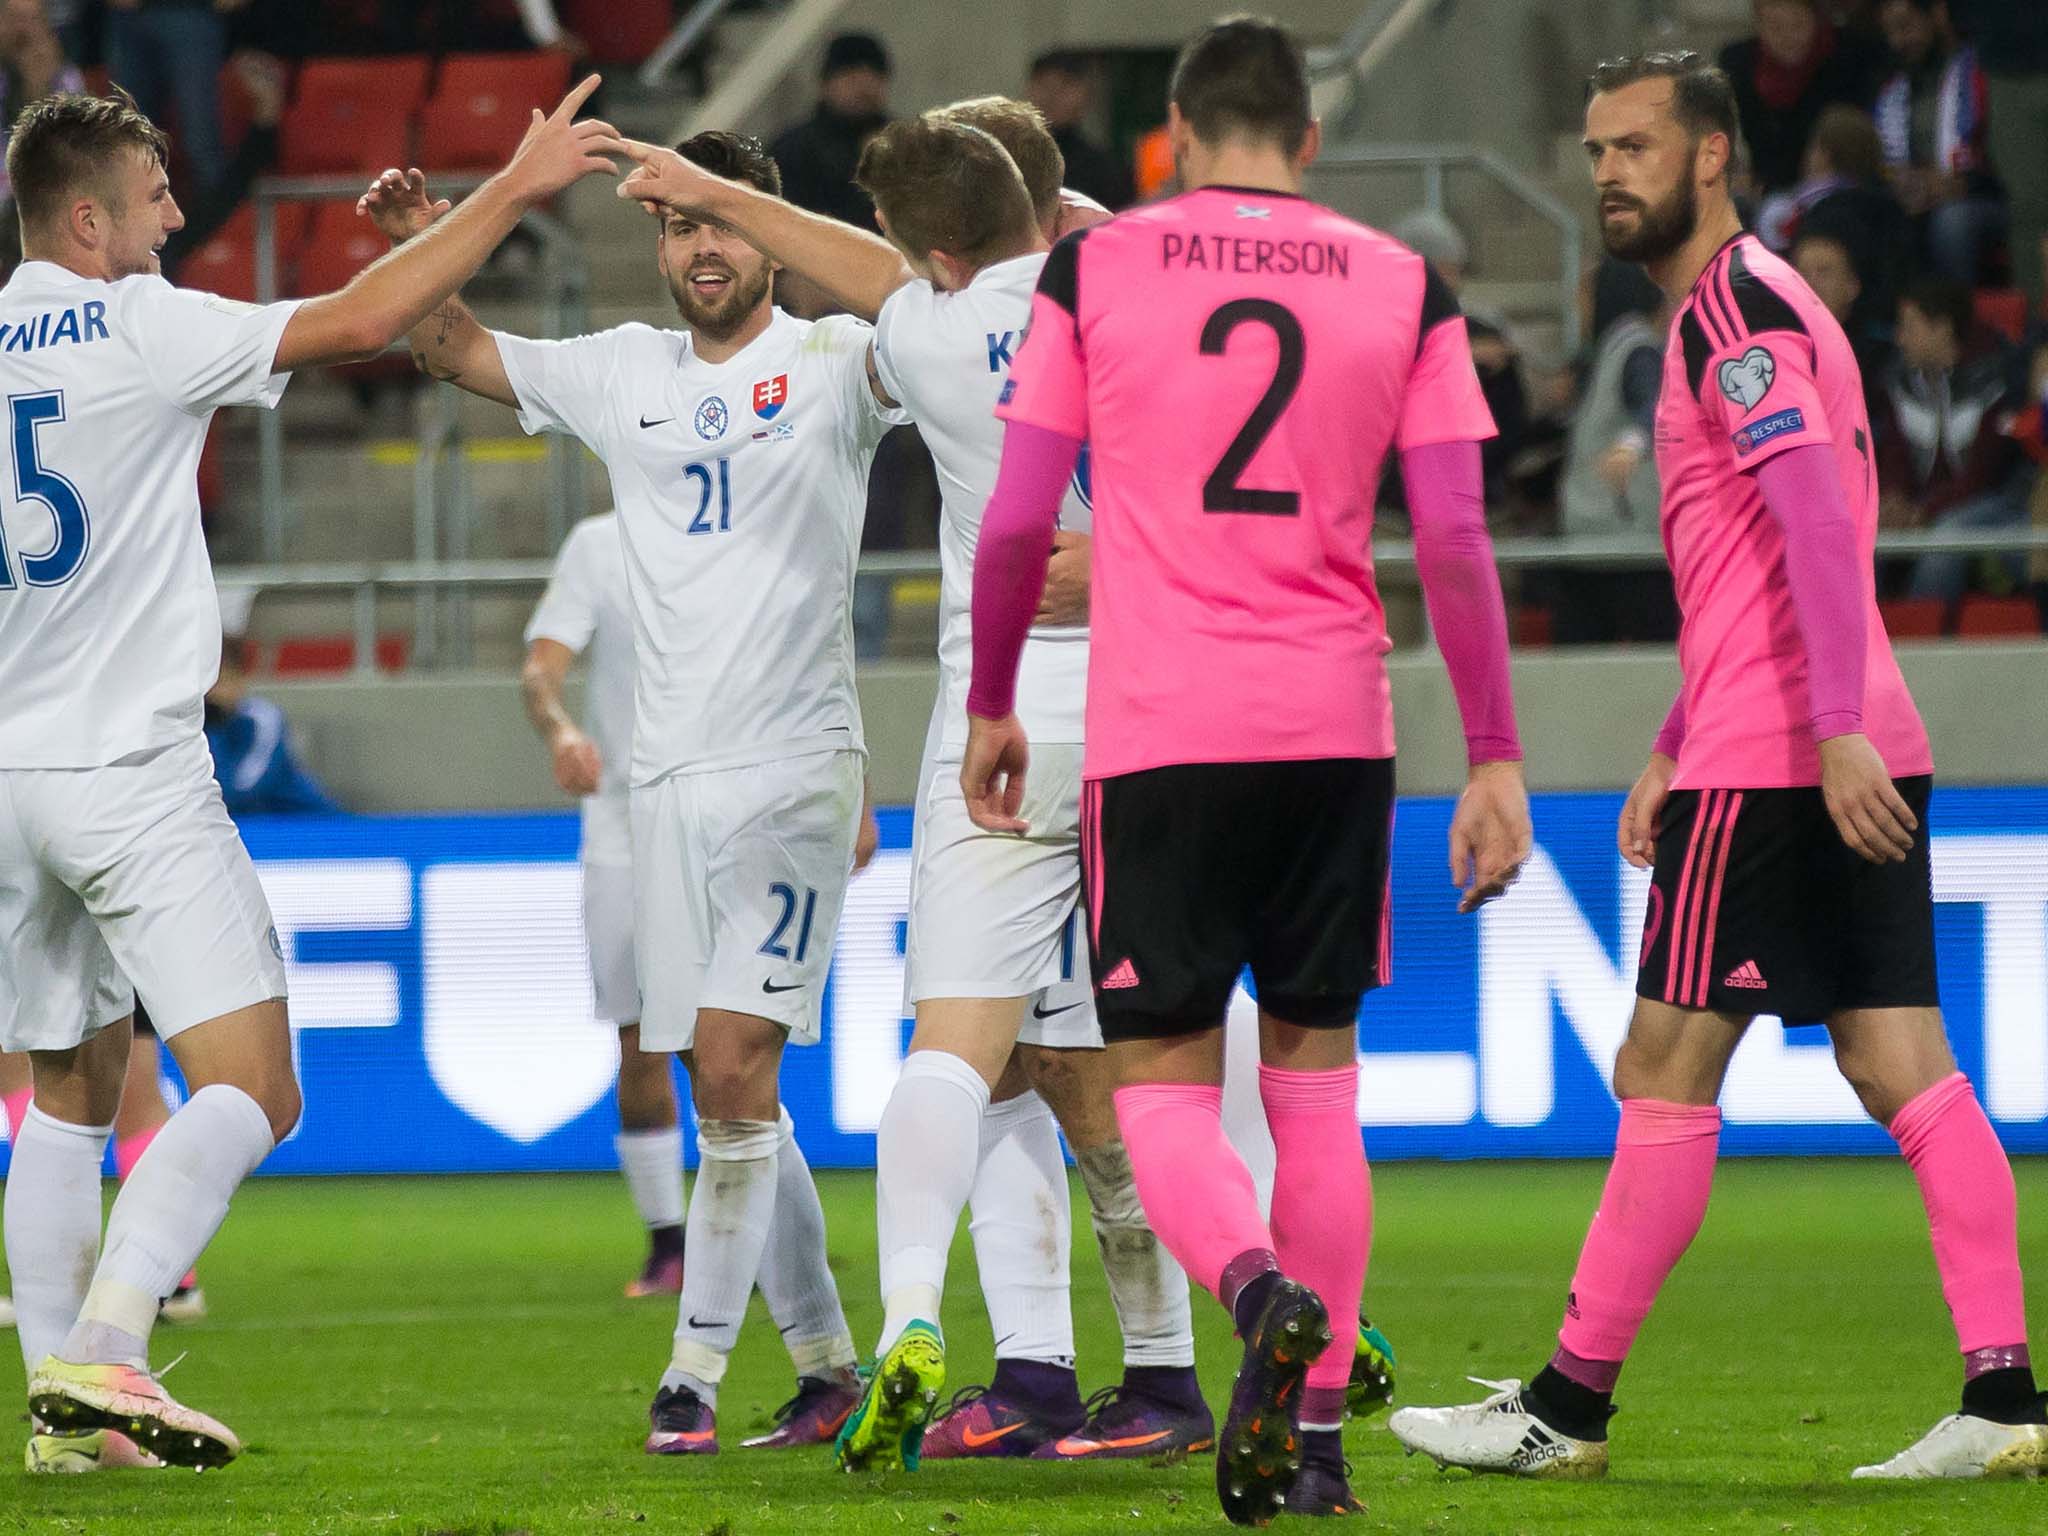 Scotland suffered a setback in their qualifying campaign